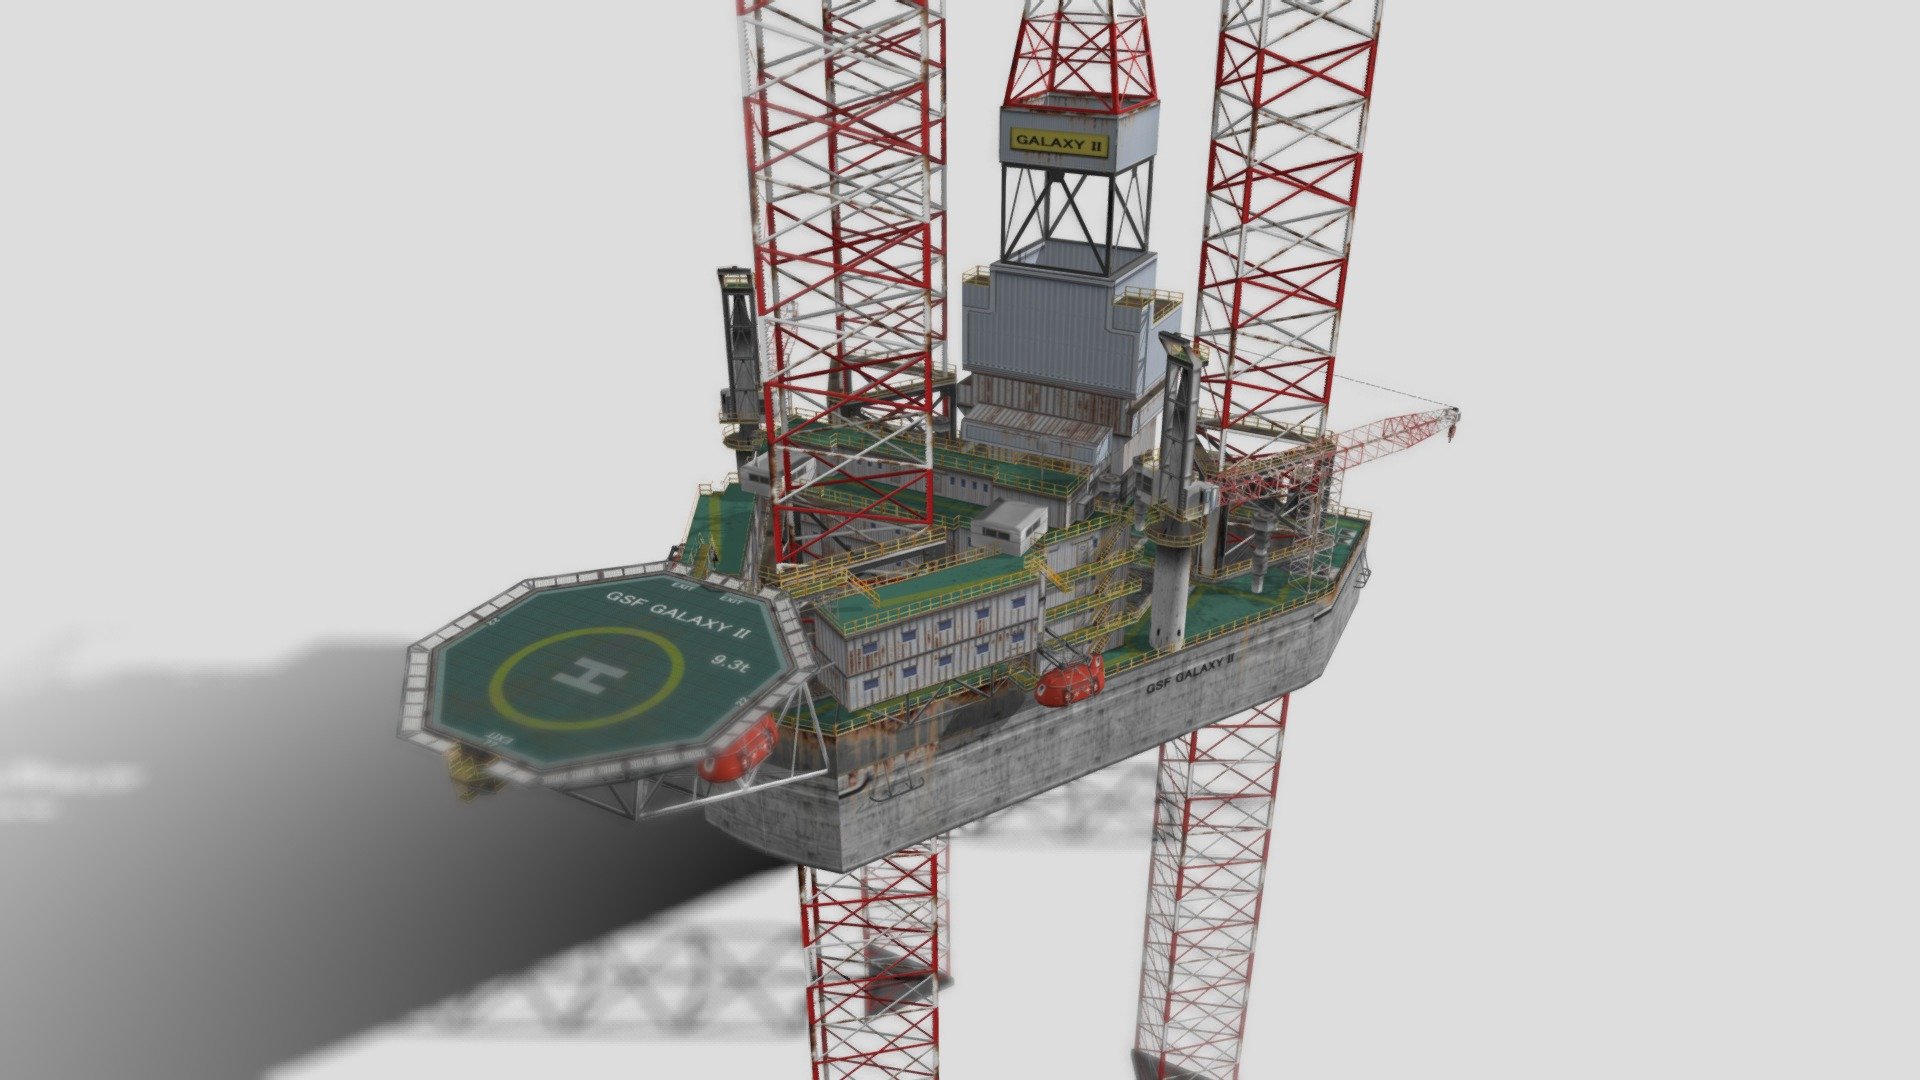 ASG-ISR

Jackup Drilling Rig.
Oil Platform.
Galaxy II 

Synthetic Environment Entity for use in Simulation and Training for Intelligence, Surveillance and Reconnaissance (ISR). 
Leg depth and drilling derek position could be reconfigured, cranes can be animated. 

Low poly model.
Accuratly modelled off plan and using photo reference.
Can be used for flight simulation as land on Helideck
1 LOD.
1 UV texture map 1024x2048.
Low poly acheived through use of alpha for legs, crane jibs, safety barriers.
no animation.
no materials.

13165 triangles
http://www.asg-isr.com - Jackup Drilling Rig "Galaxy II" Low Poly - 3D model by ASG-ISR 3d model